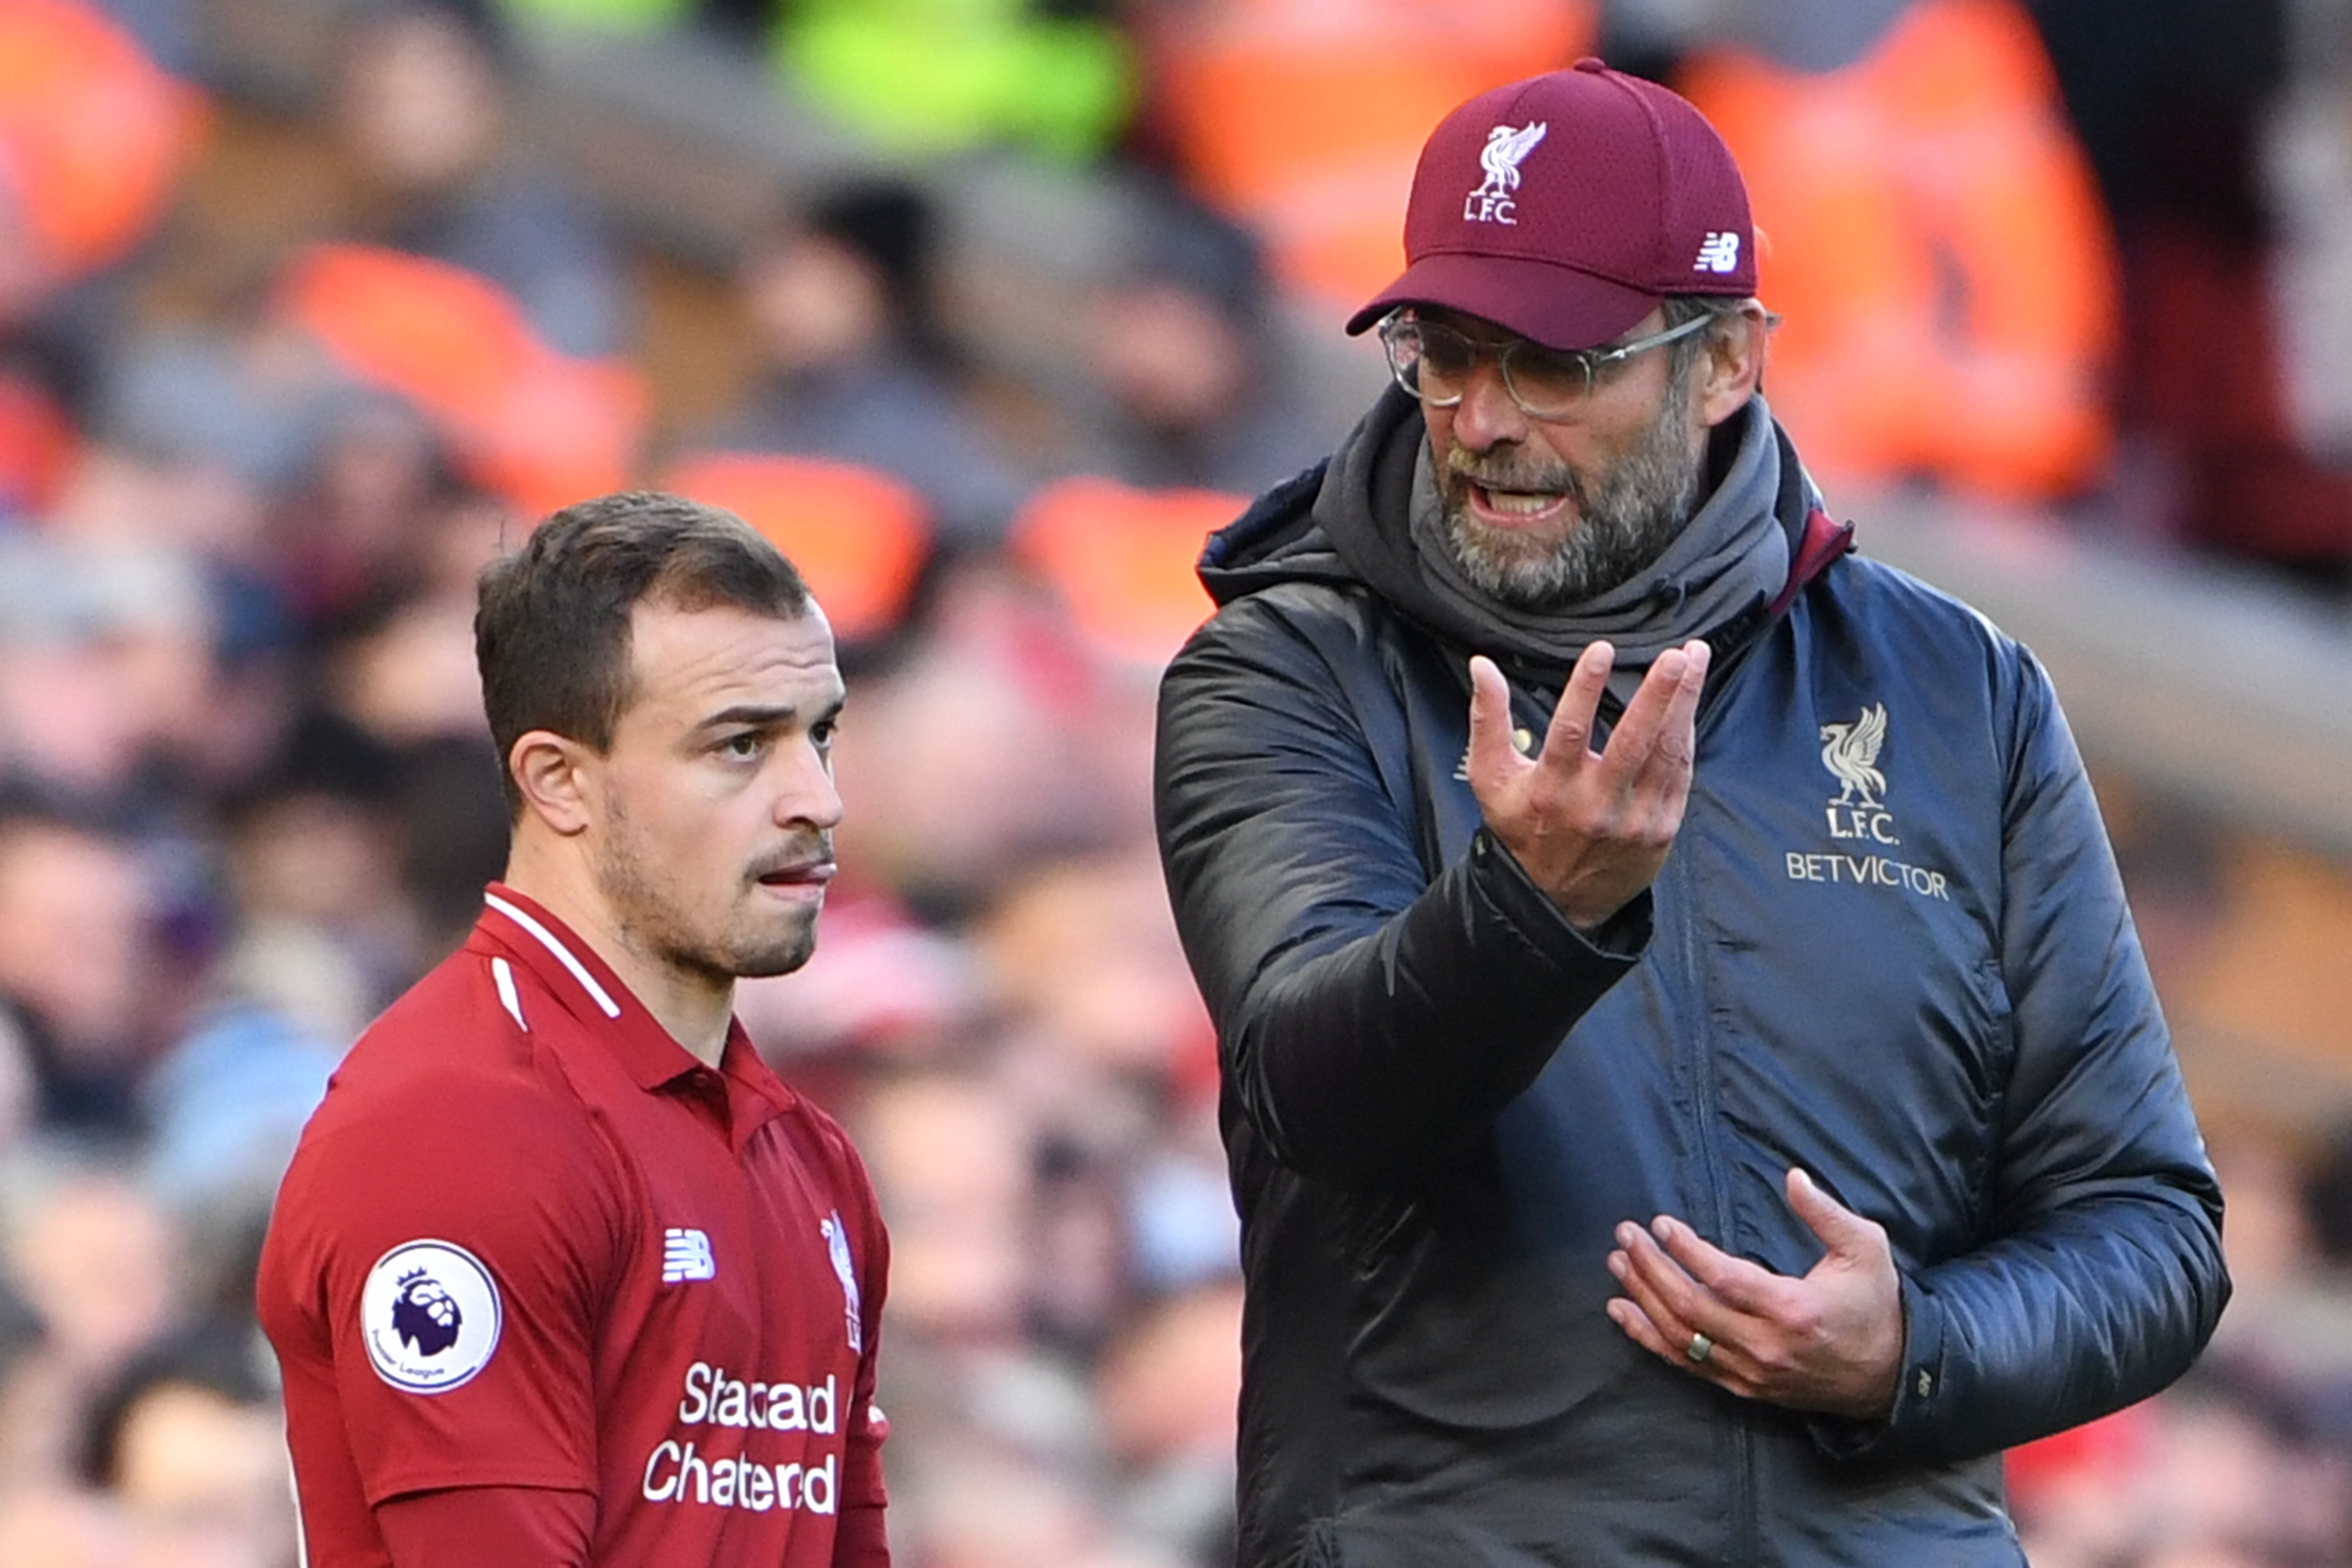 Shaqiri seems to be struggling with his confidence. (Picture Courtesy - AFP/Getty Images)